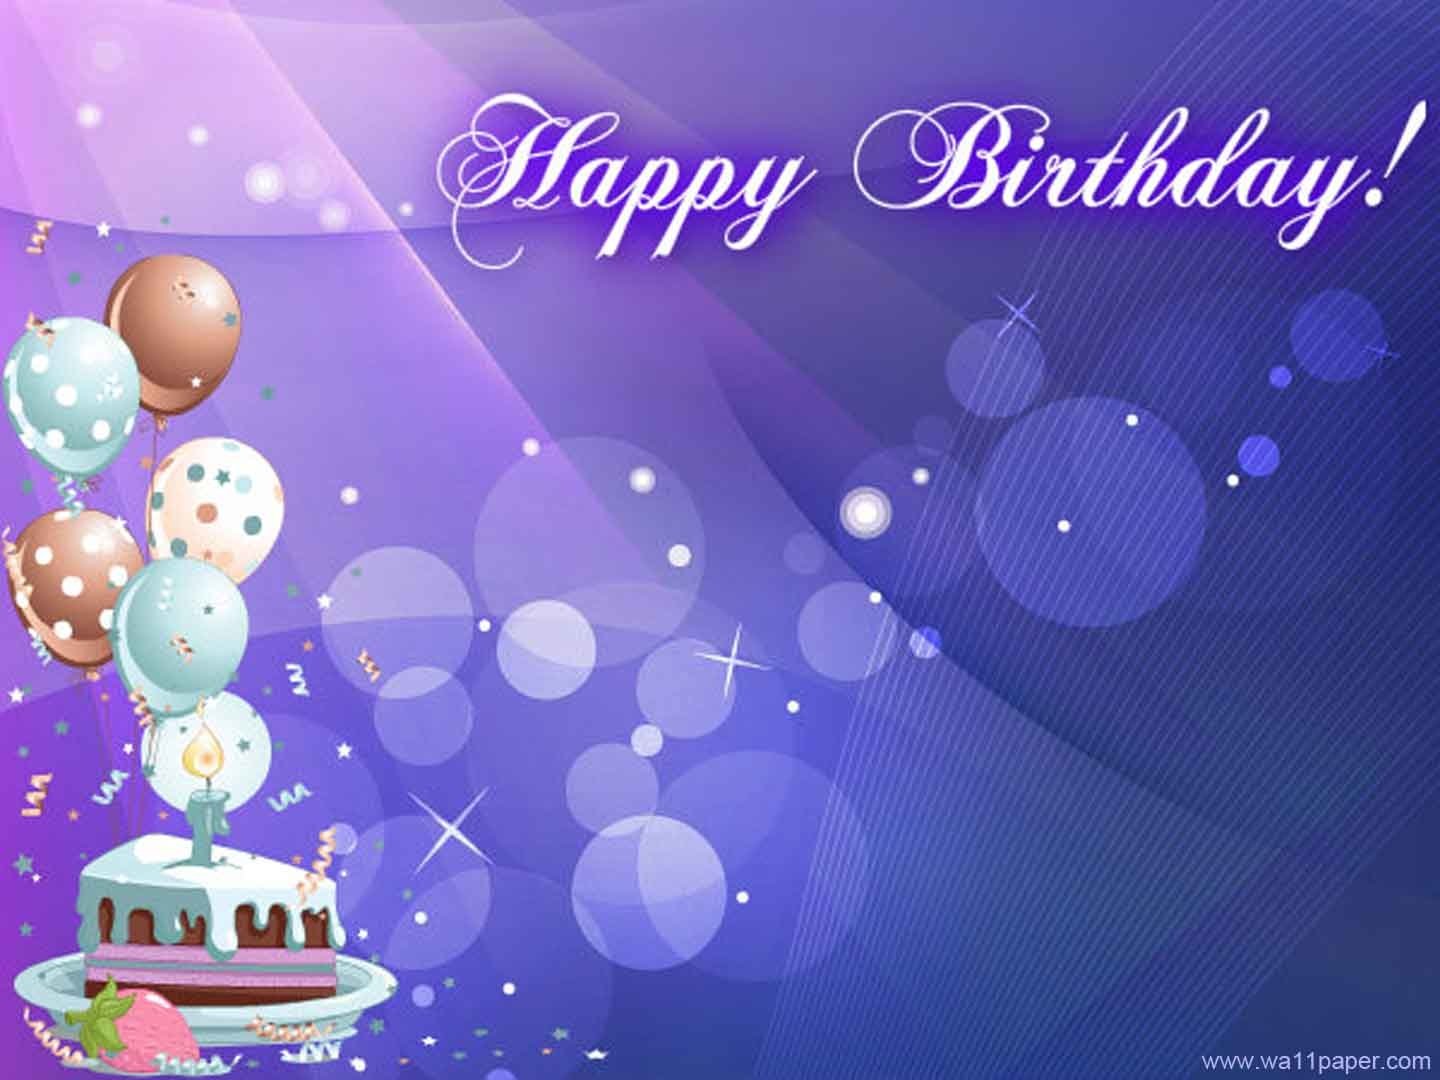 63 Birthday HD Wallpapers | Backgrounds - Wallpaper Abyss